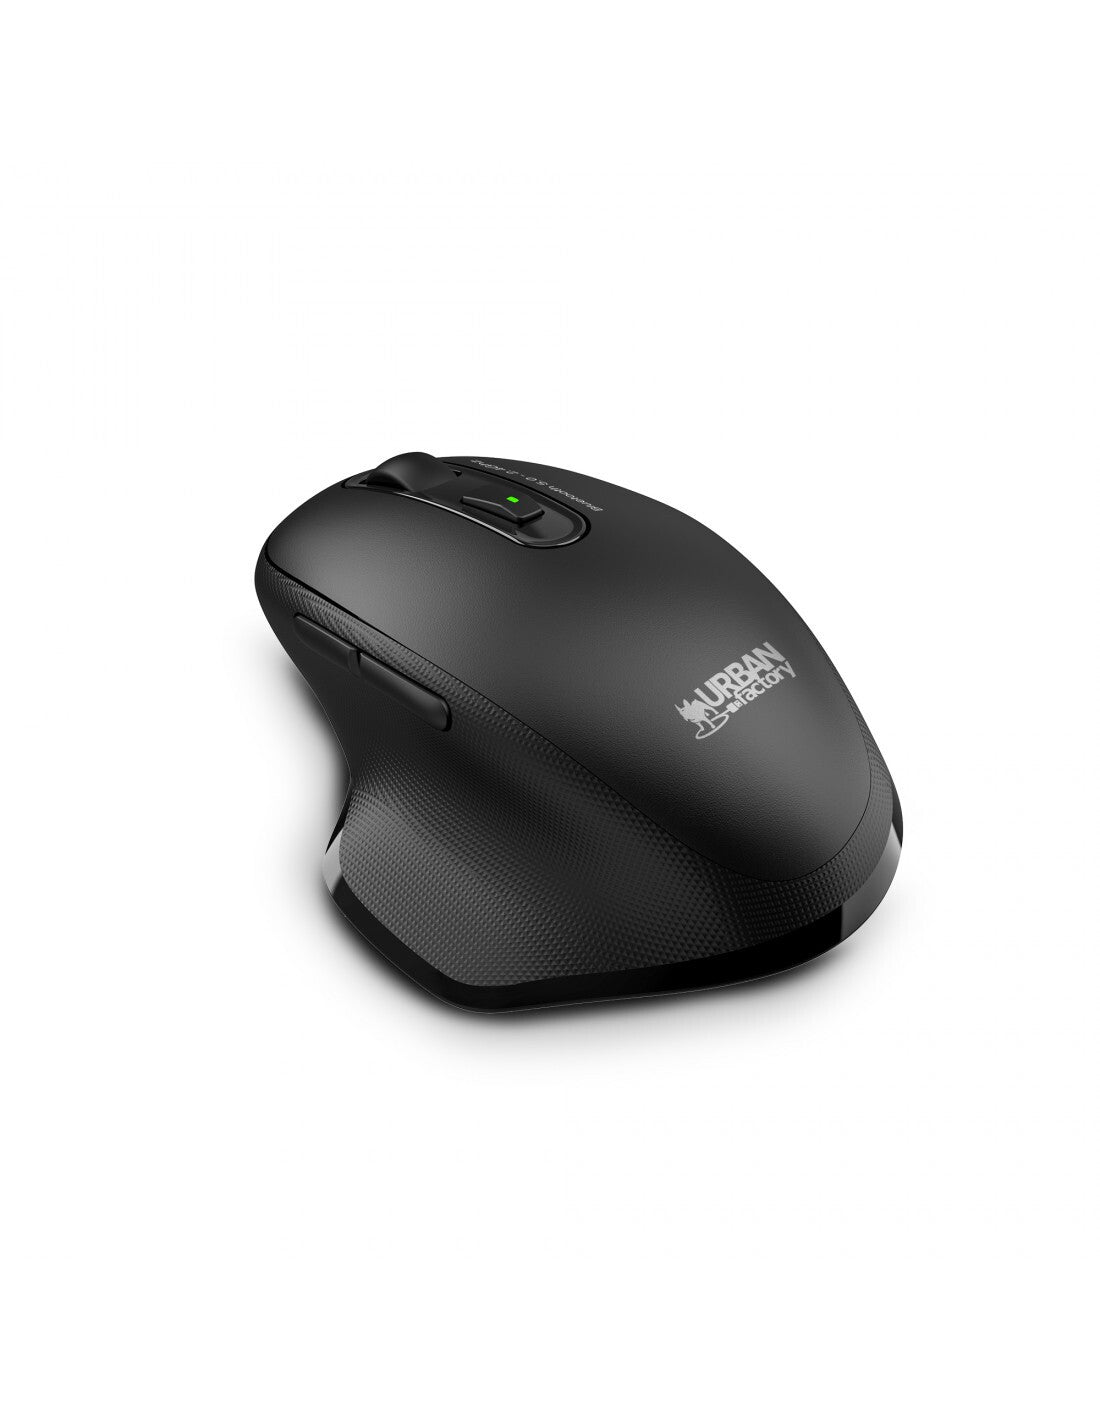 Urban Factory ONLEE PRO DUAL - RF Wireless + Bluetooth Optical Mouse in Black - 1,600 DPI